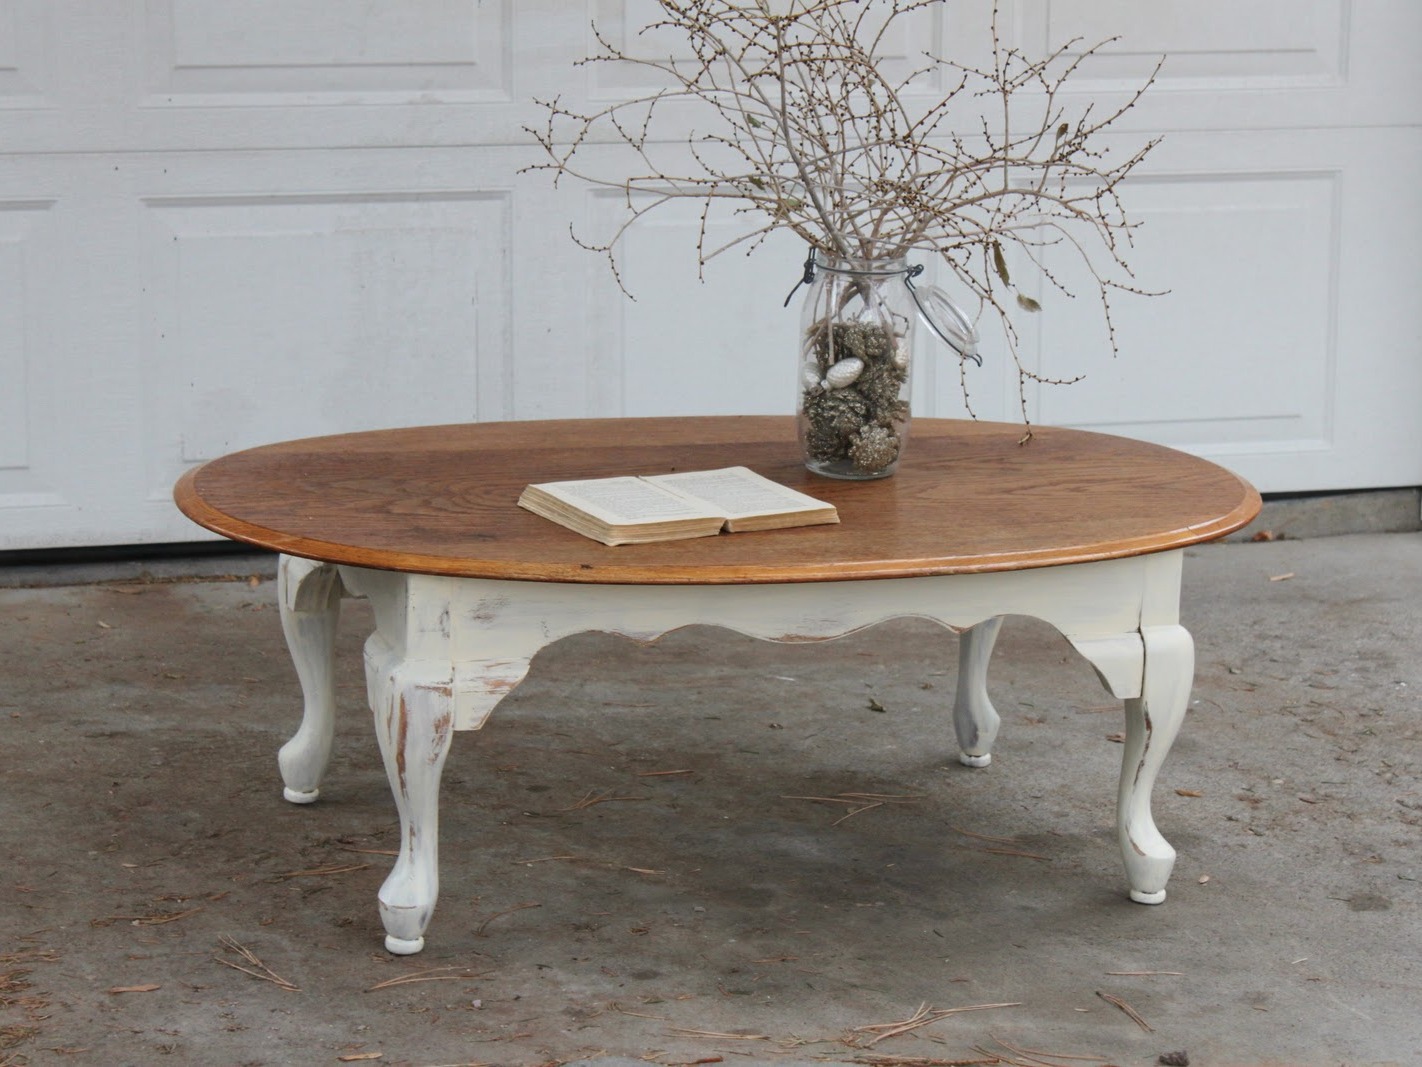 Vintage Coffee Table Design Images Photos Pictures